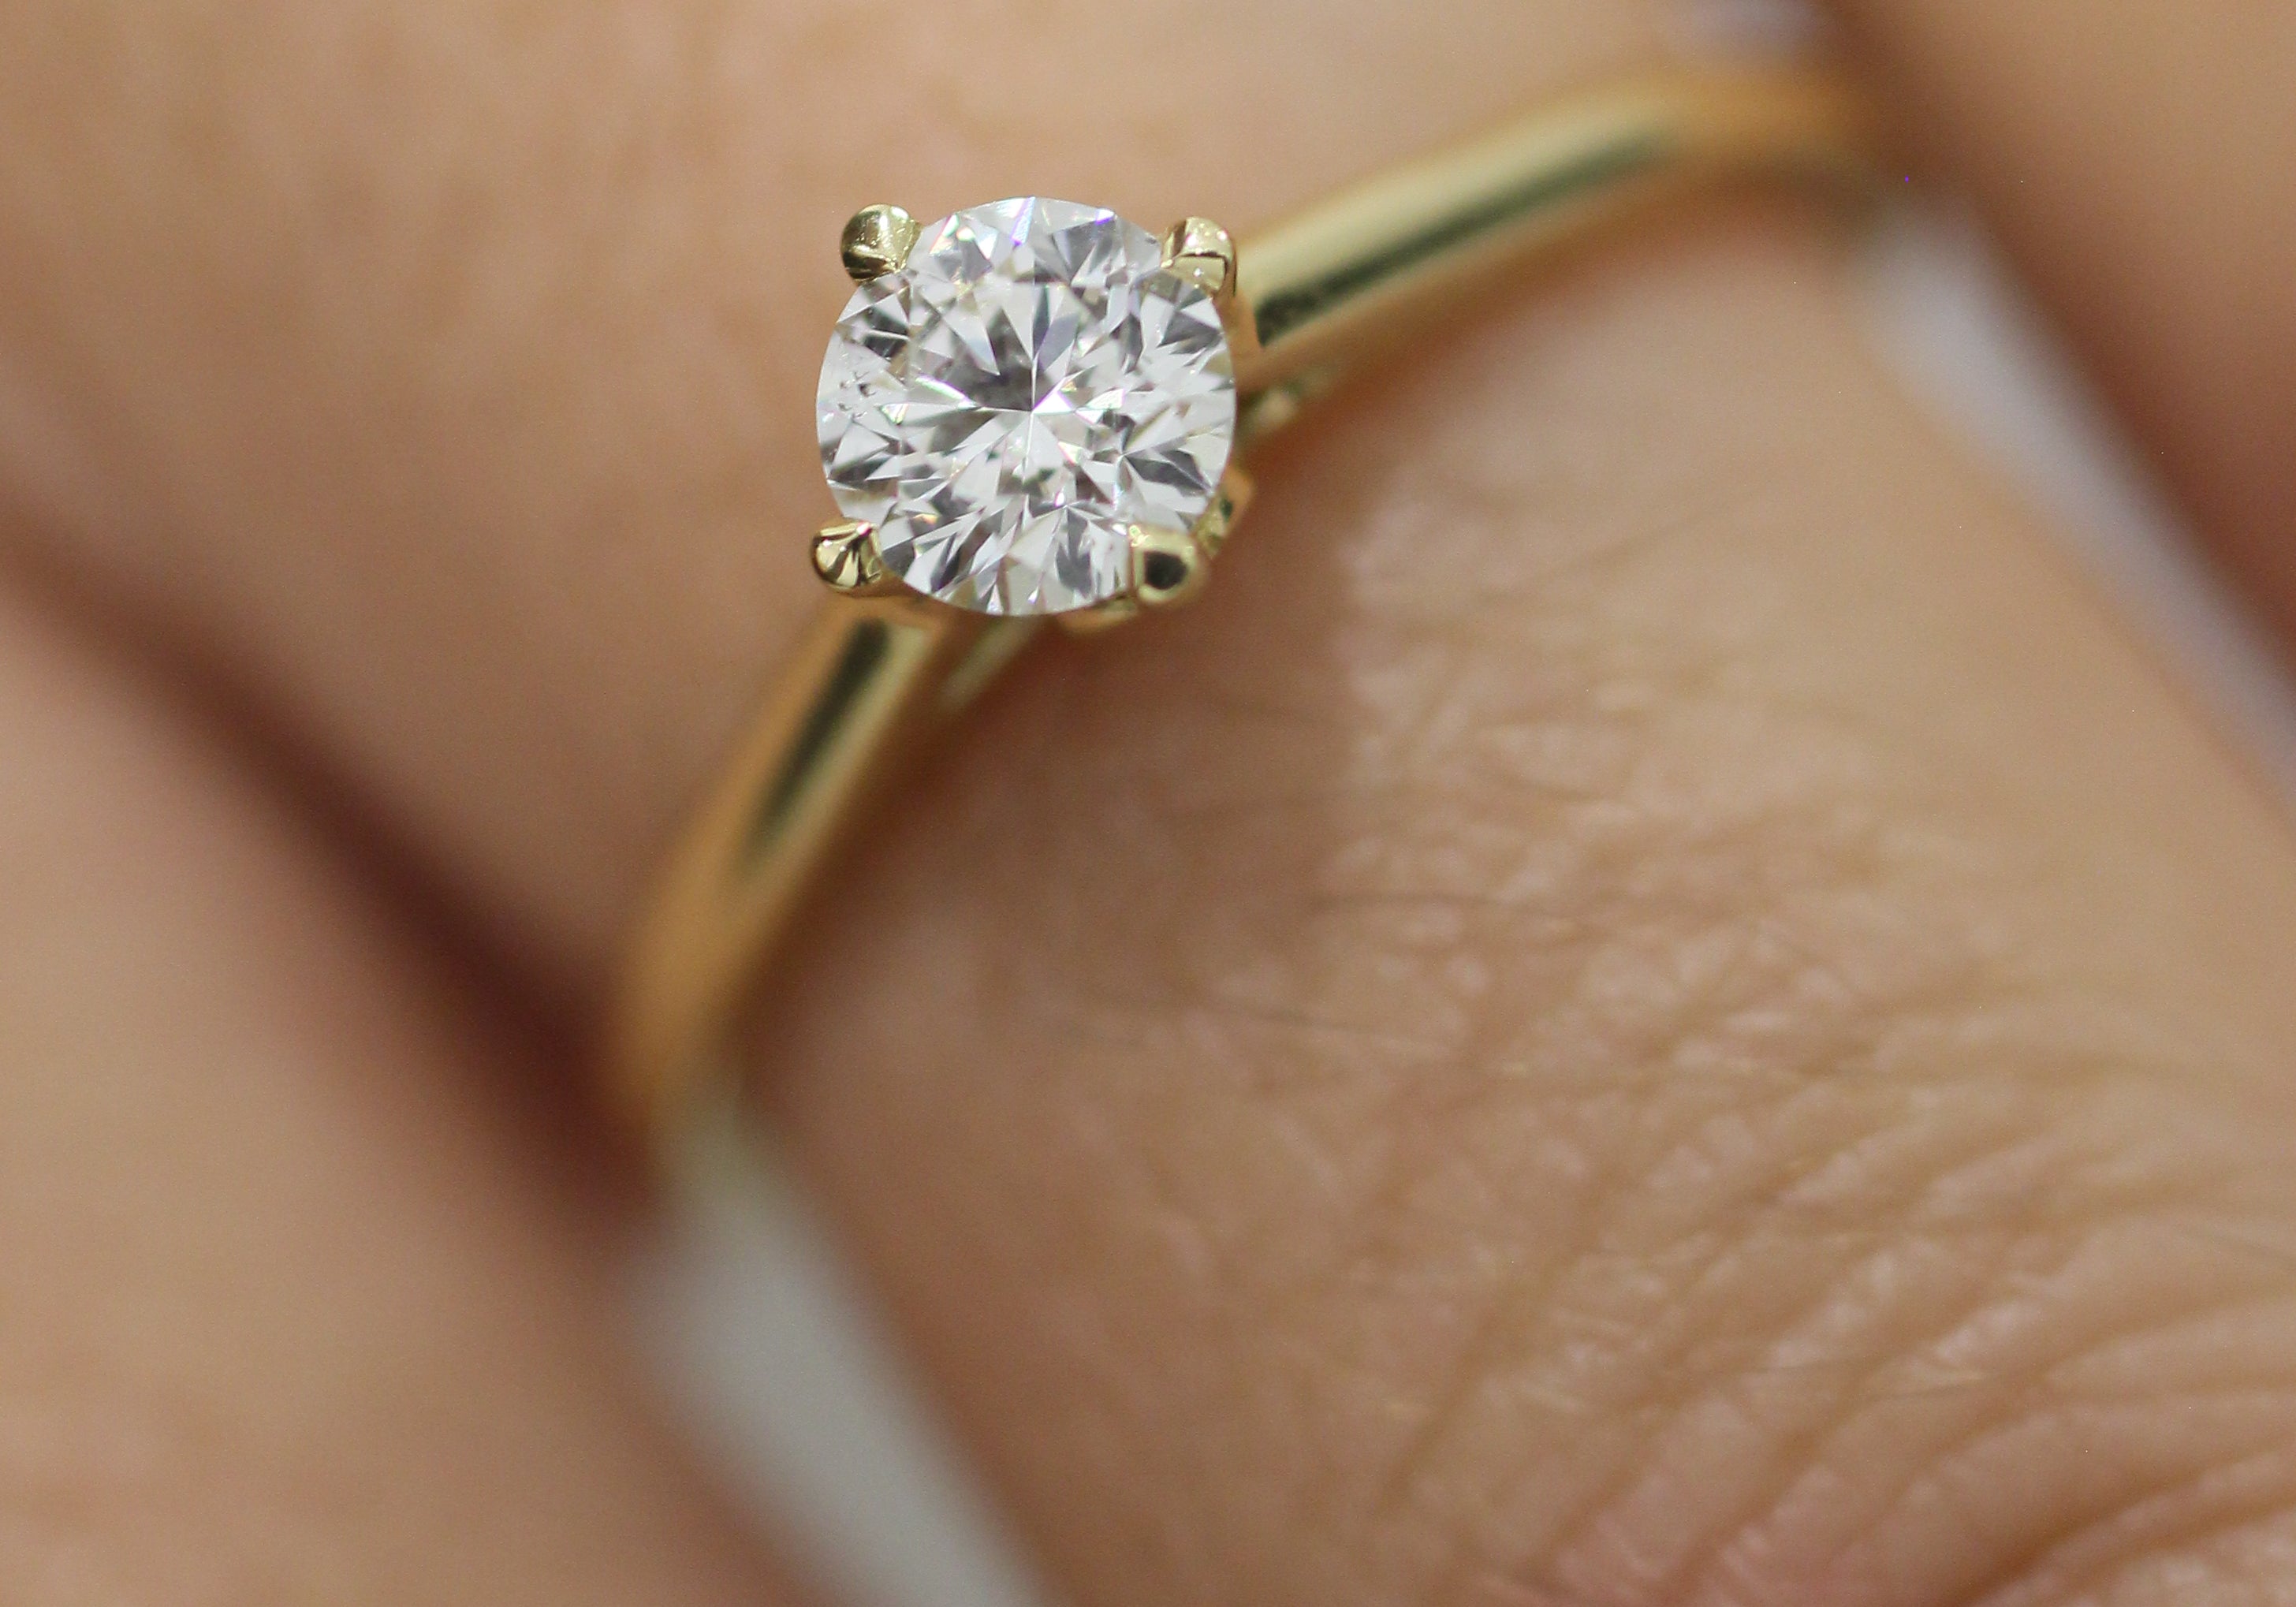 This 0.37ct G, SI, Excellent Cut Certified Diamond is a truly mesmerizing sight to behold! Set in a timeless 18K yellow Gold band with North/South/East/West prongs, this diamond is sure to make it's wearer feel as if they are in the clouds.